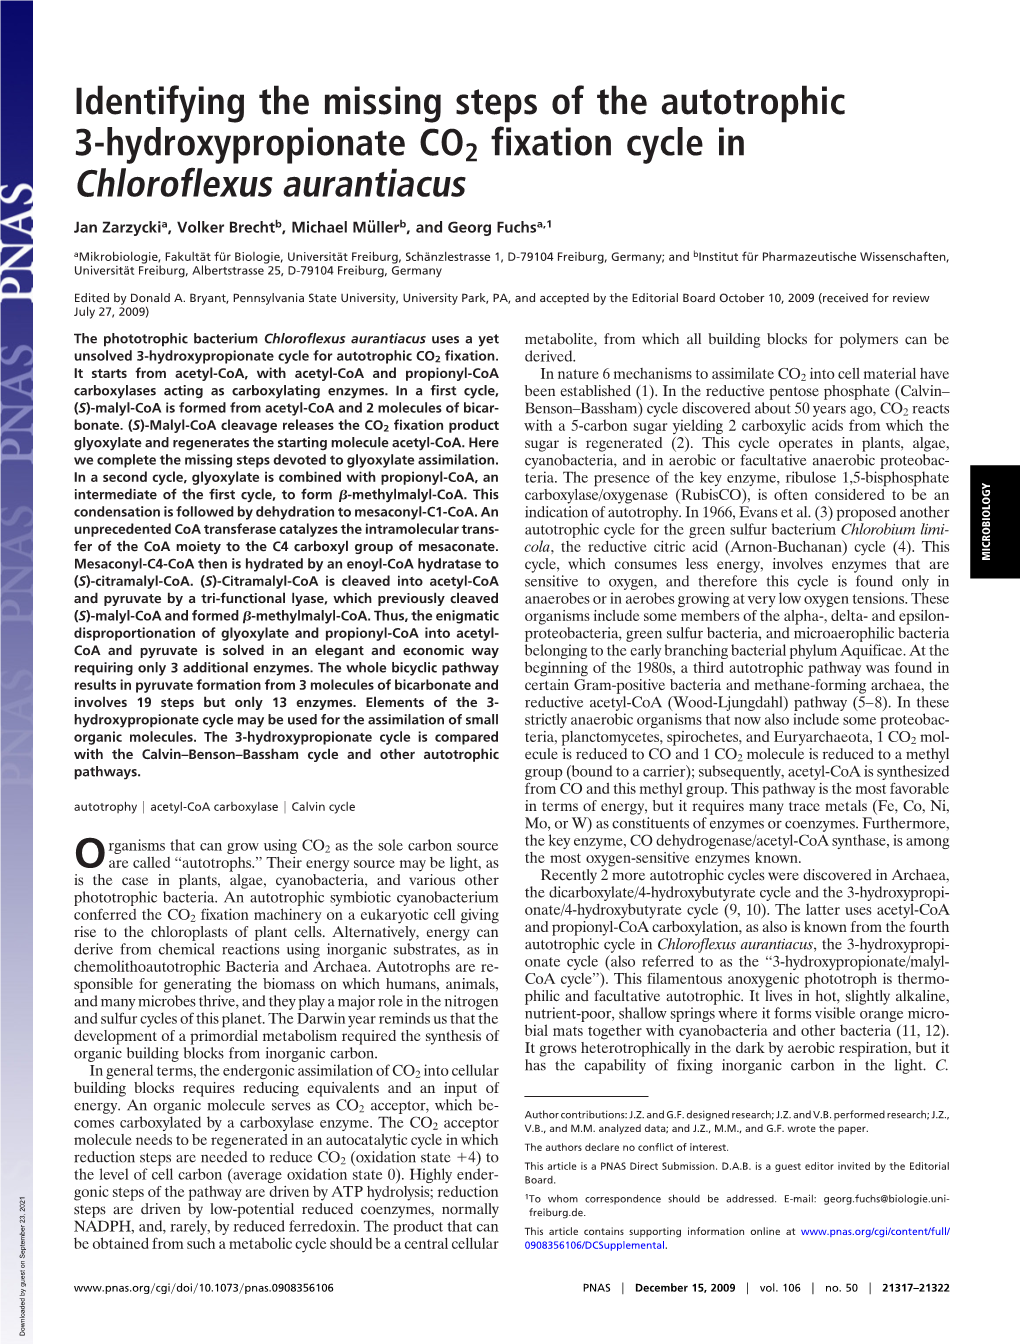 Identifying the Missing Steps of the Autotrophic 3-Hydroxypropionate CO2 Fixation Cycle in Chloroflexus Aurantiacus